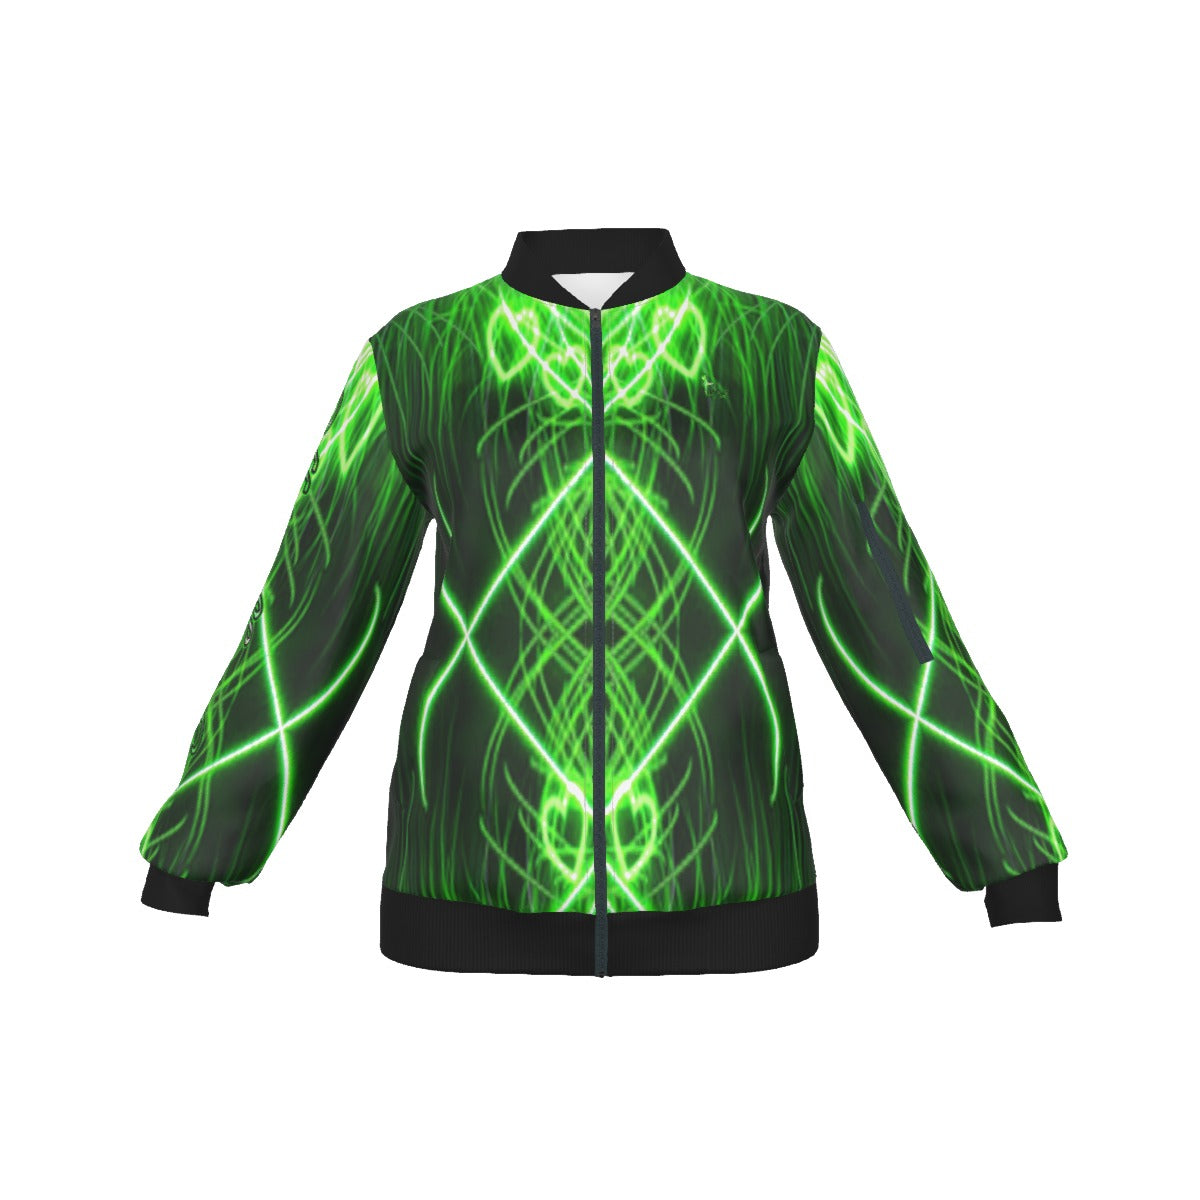 Officially Sexy Neon Green Laser Hearts Collection Women's Jacket (English) #1 1